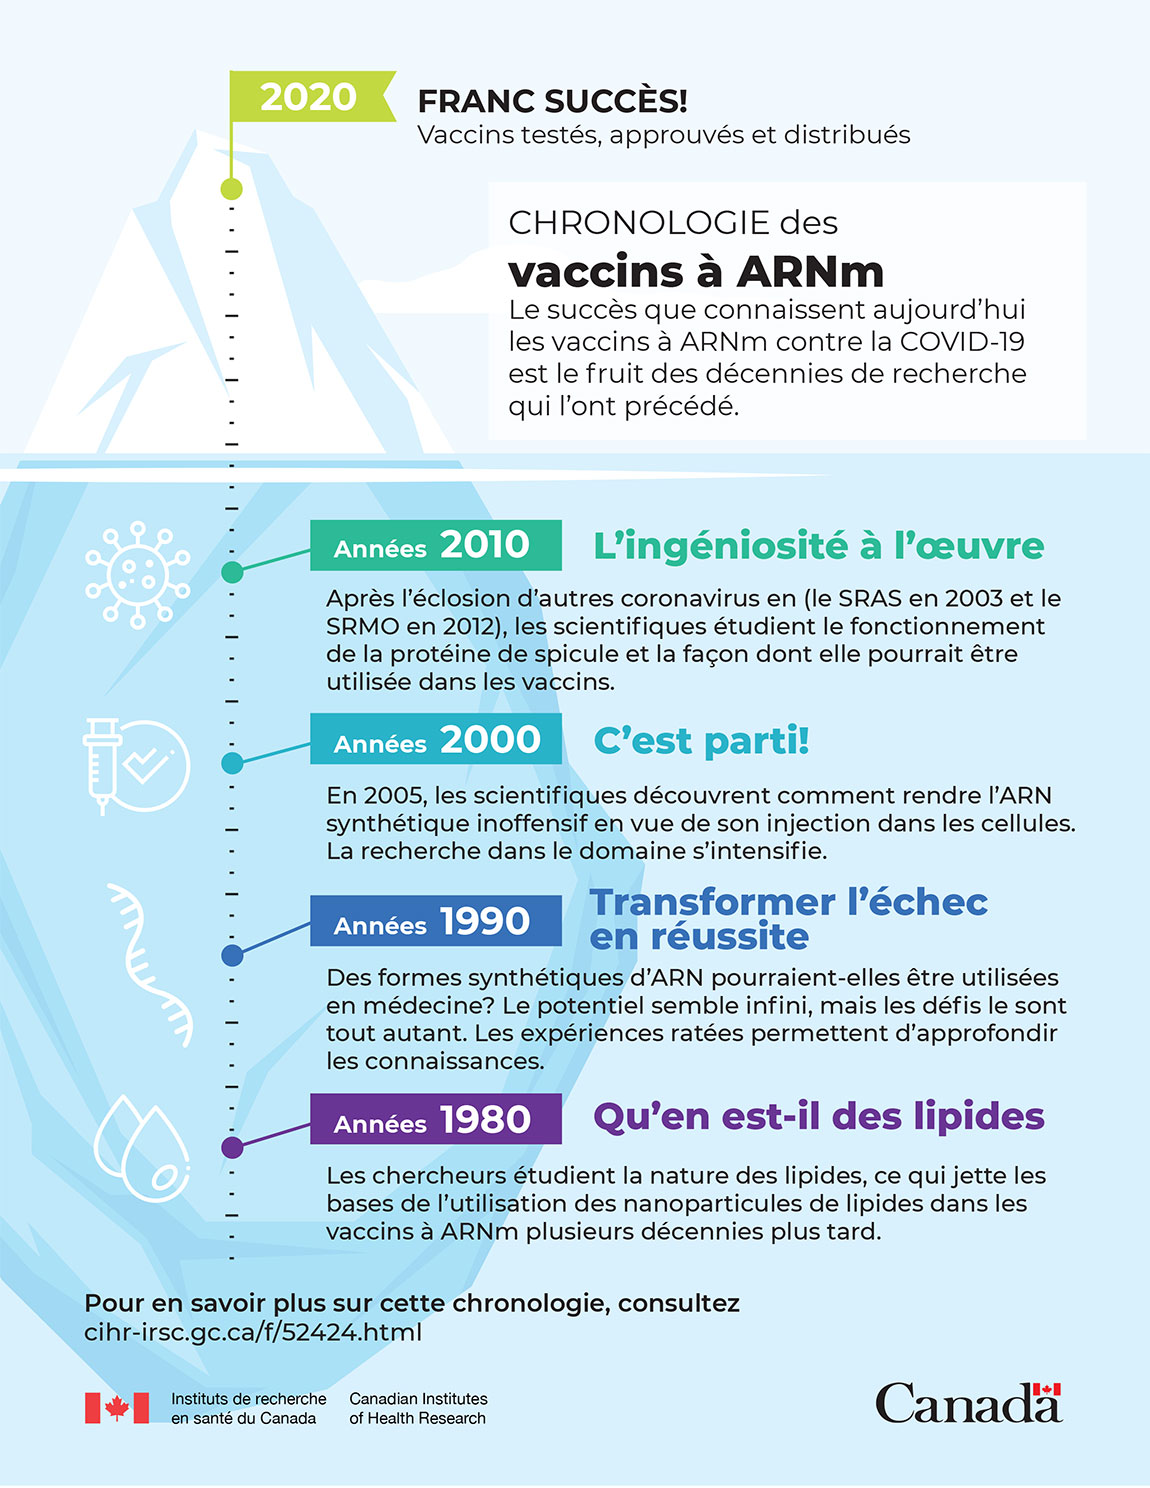 Infographic: The History of mRNA vaccines